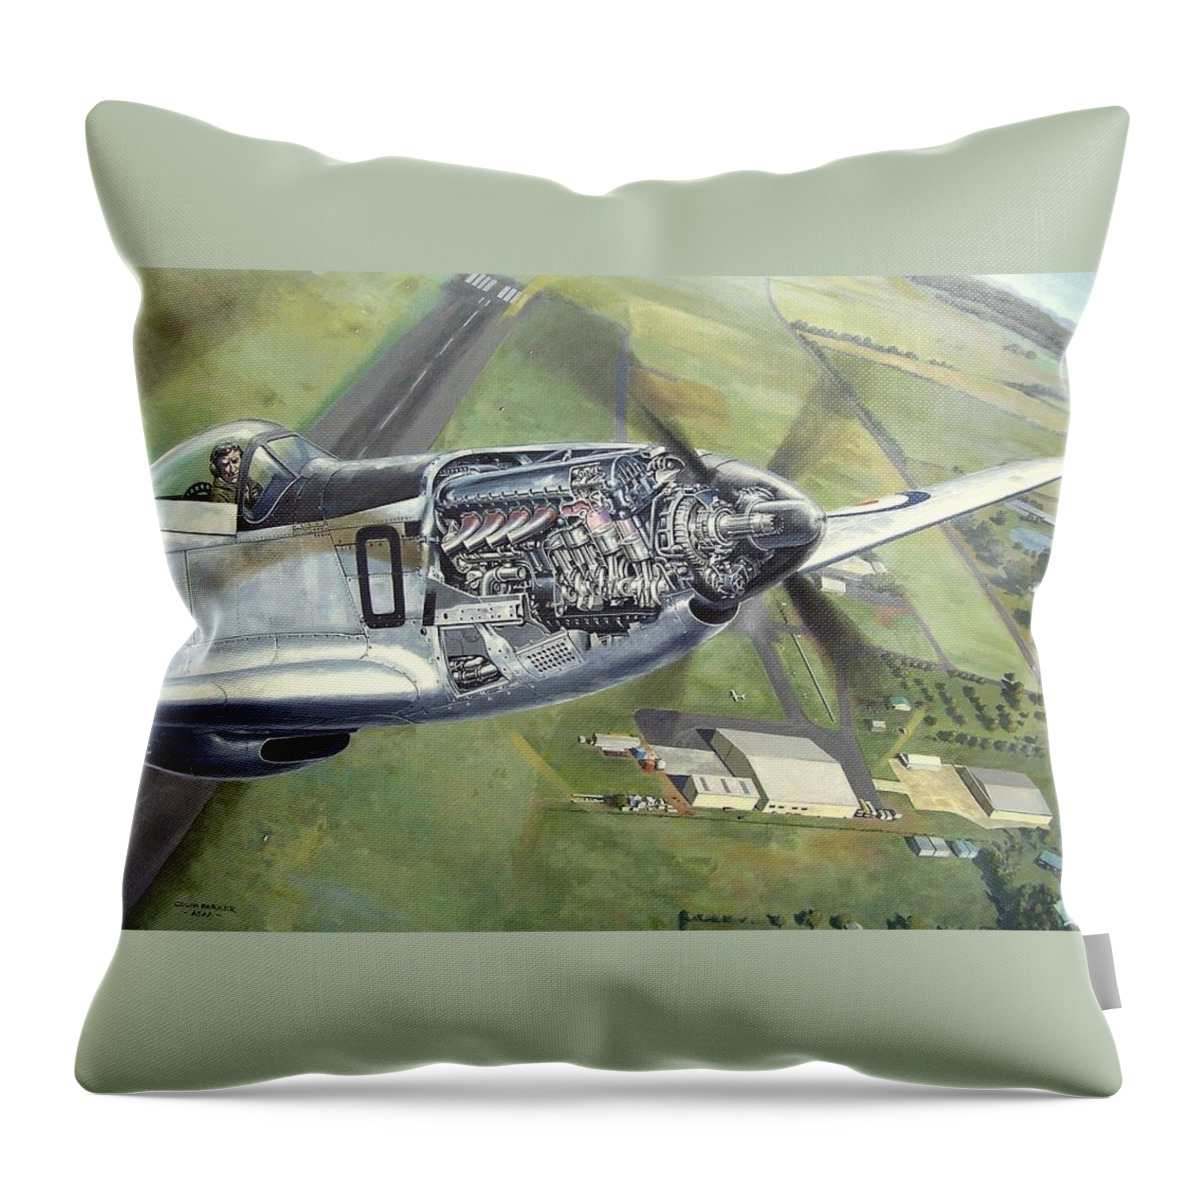 Mustang. Merlin Aircraft Engine. Cutaway Engine. Scone Airport. Col Pay 07 Mustang. North American P51 Mustang. Throw Pillow featuring the painting Merlin Magic over Scone by Colin Parker